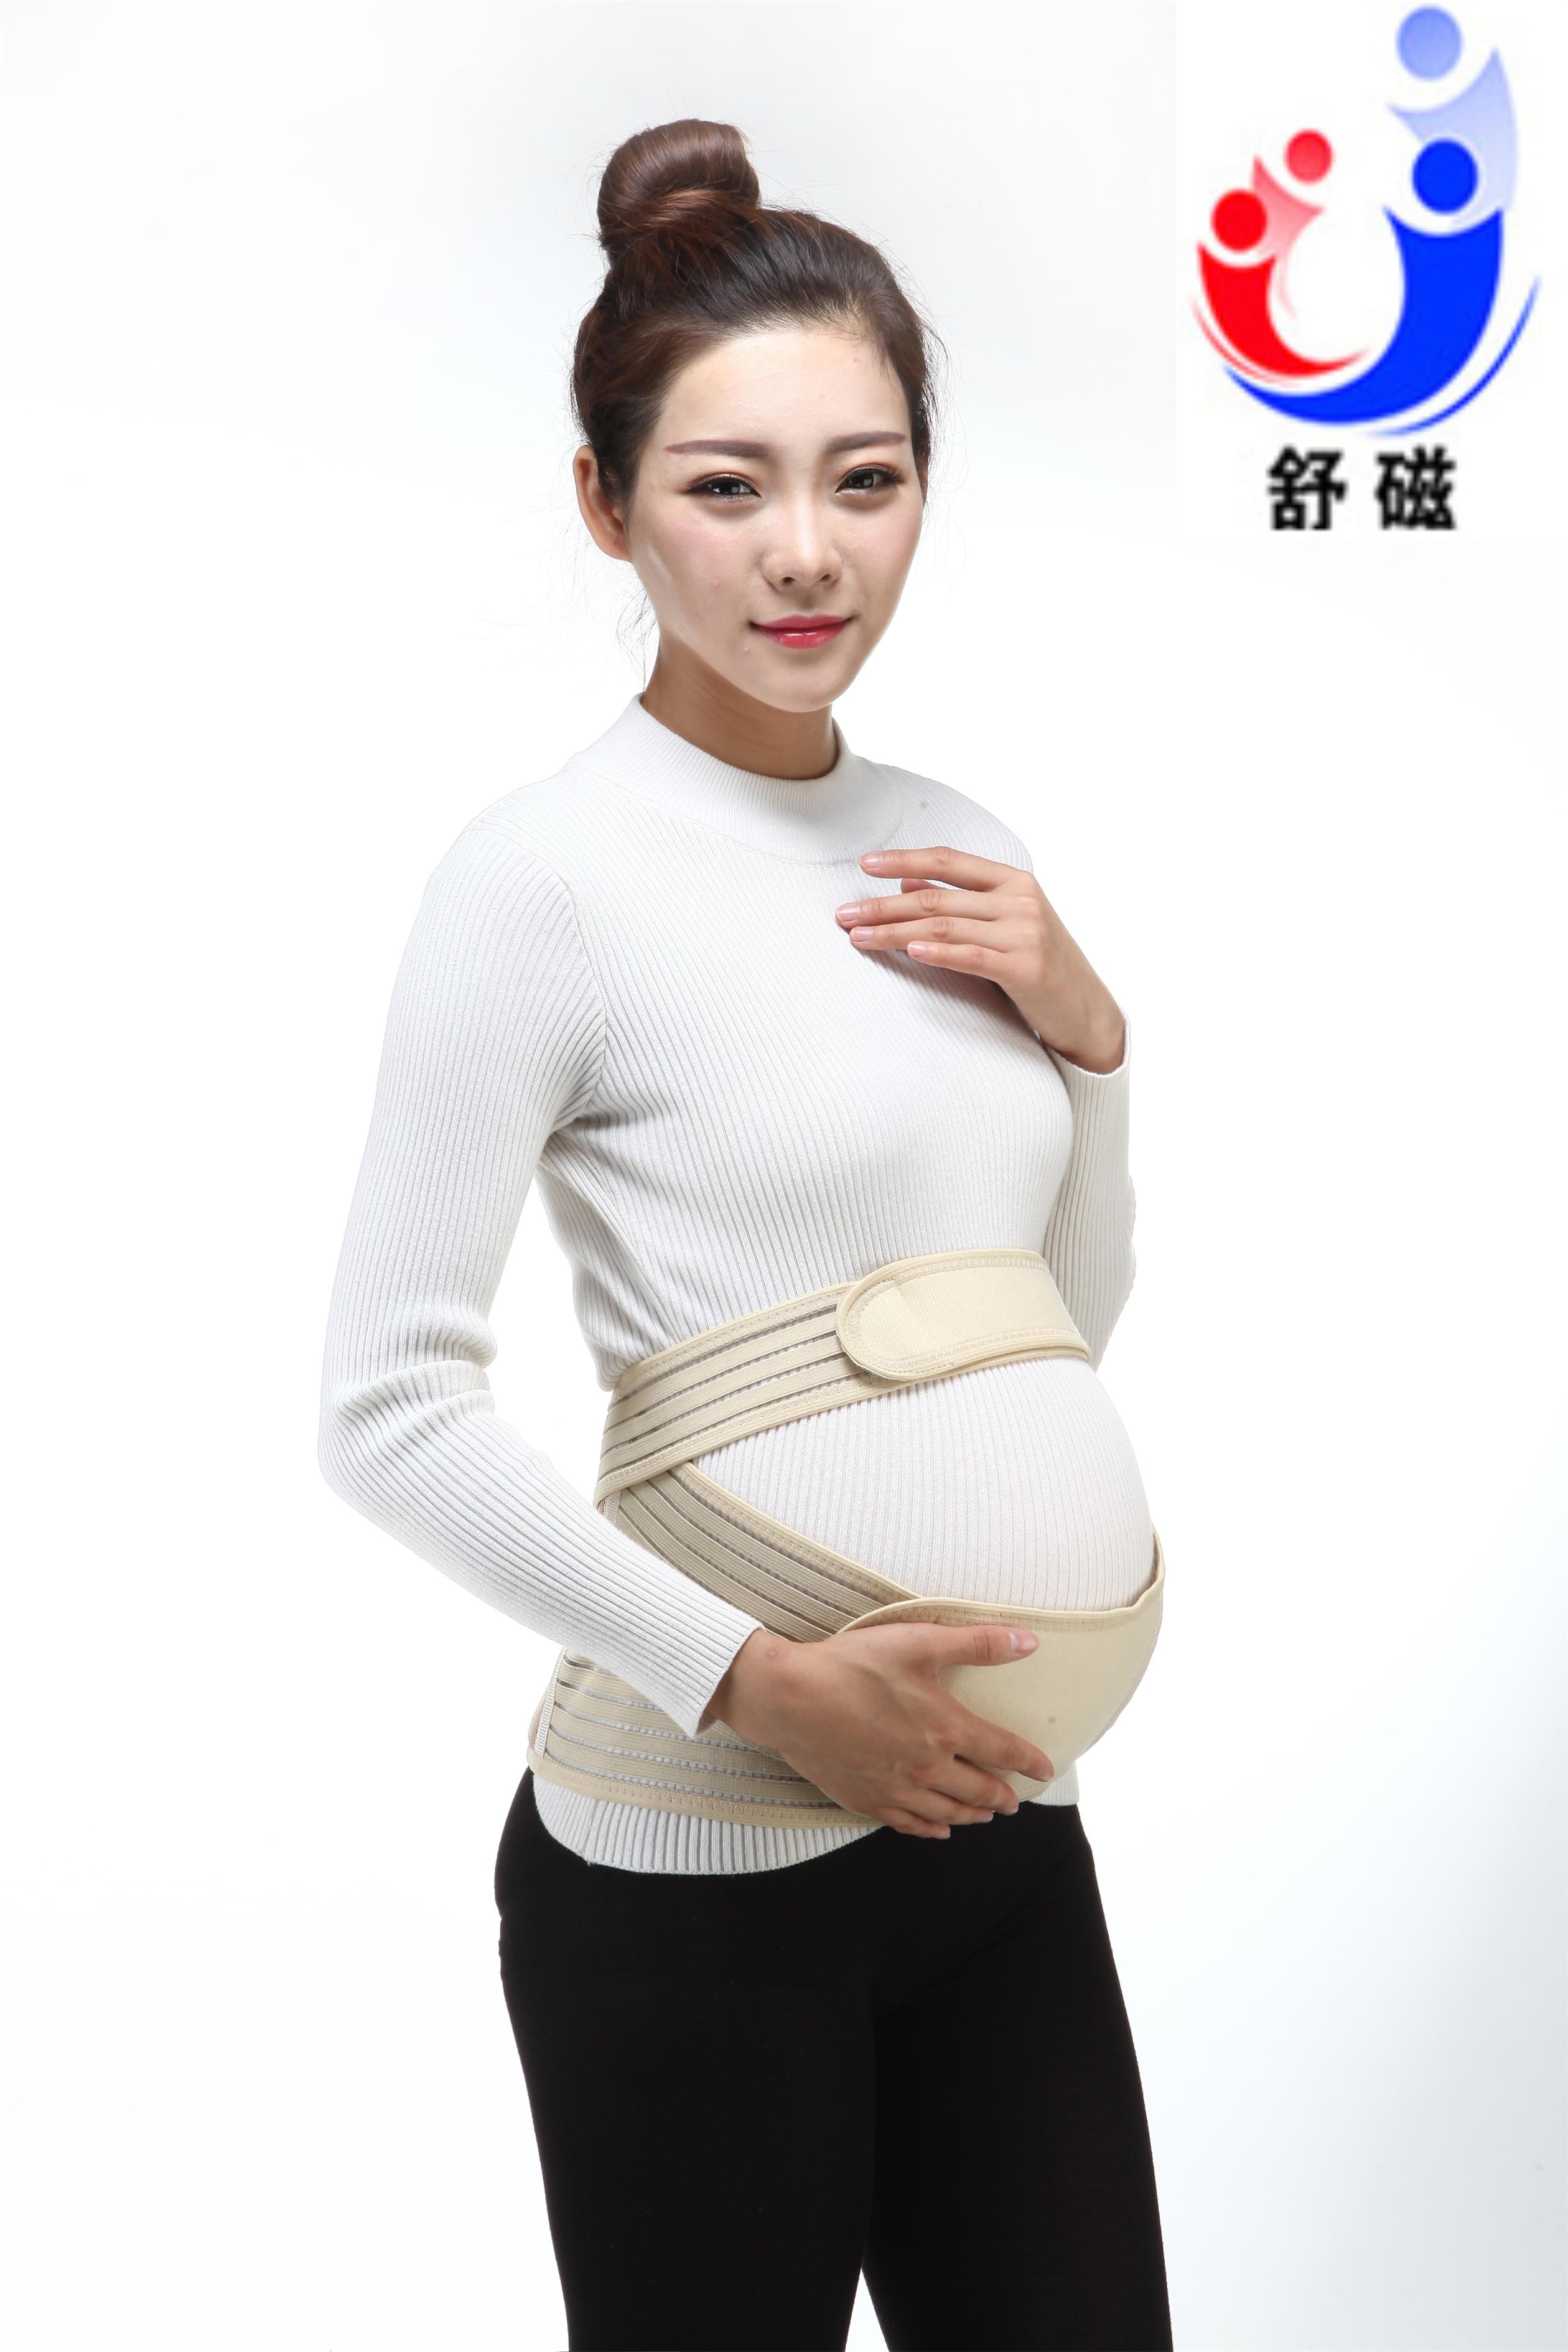 Pregnancy Belt For Belly Support Maternity Band Relieves Pelvic